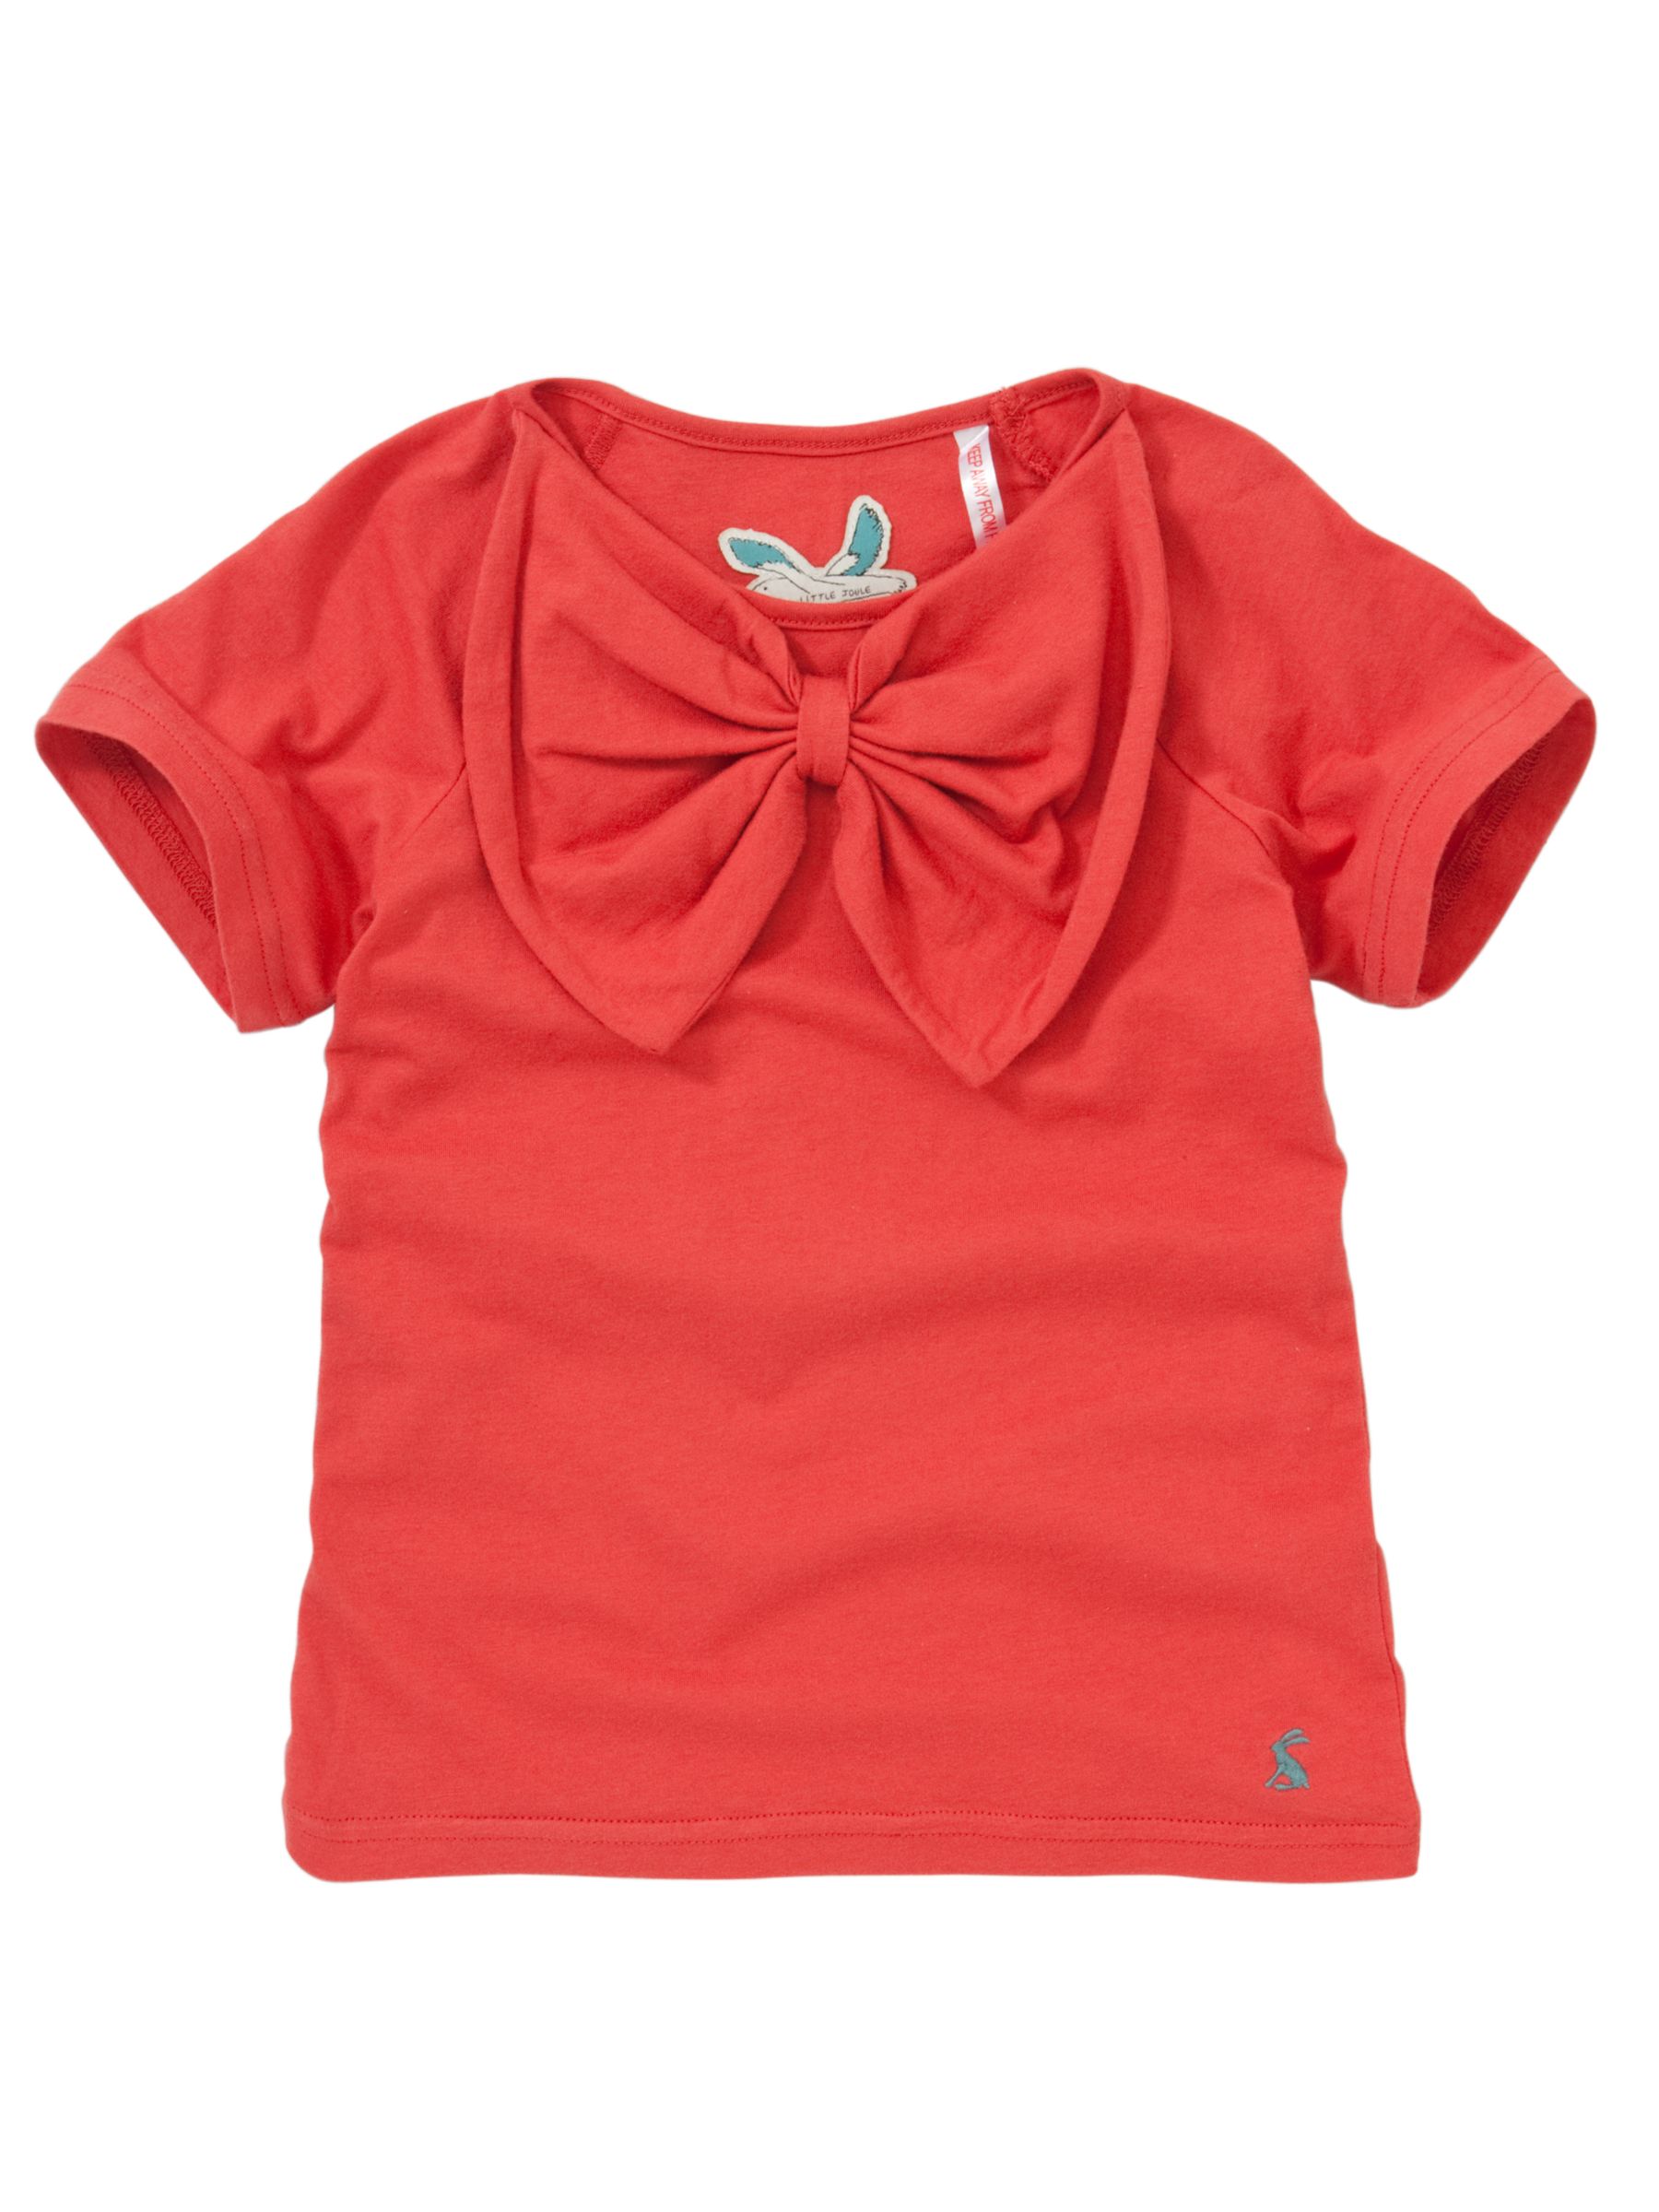 Little Joules Bow T-Shirt, Coral